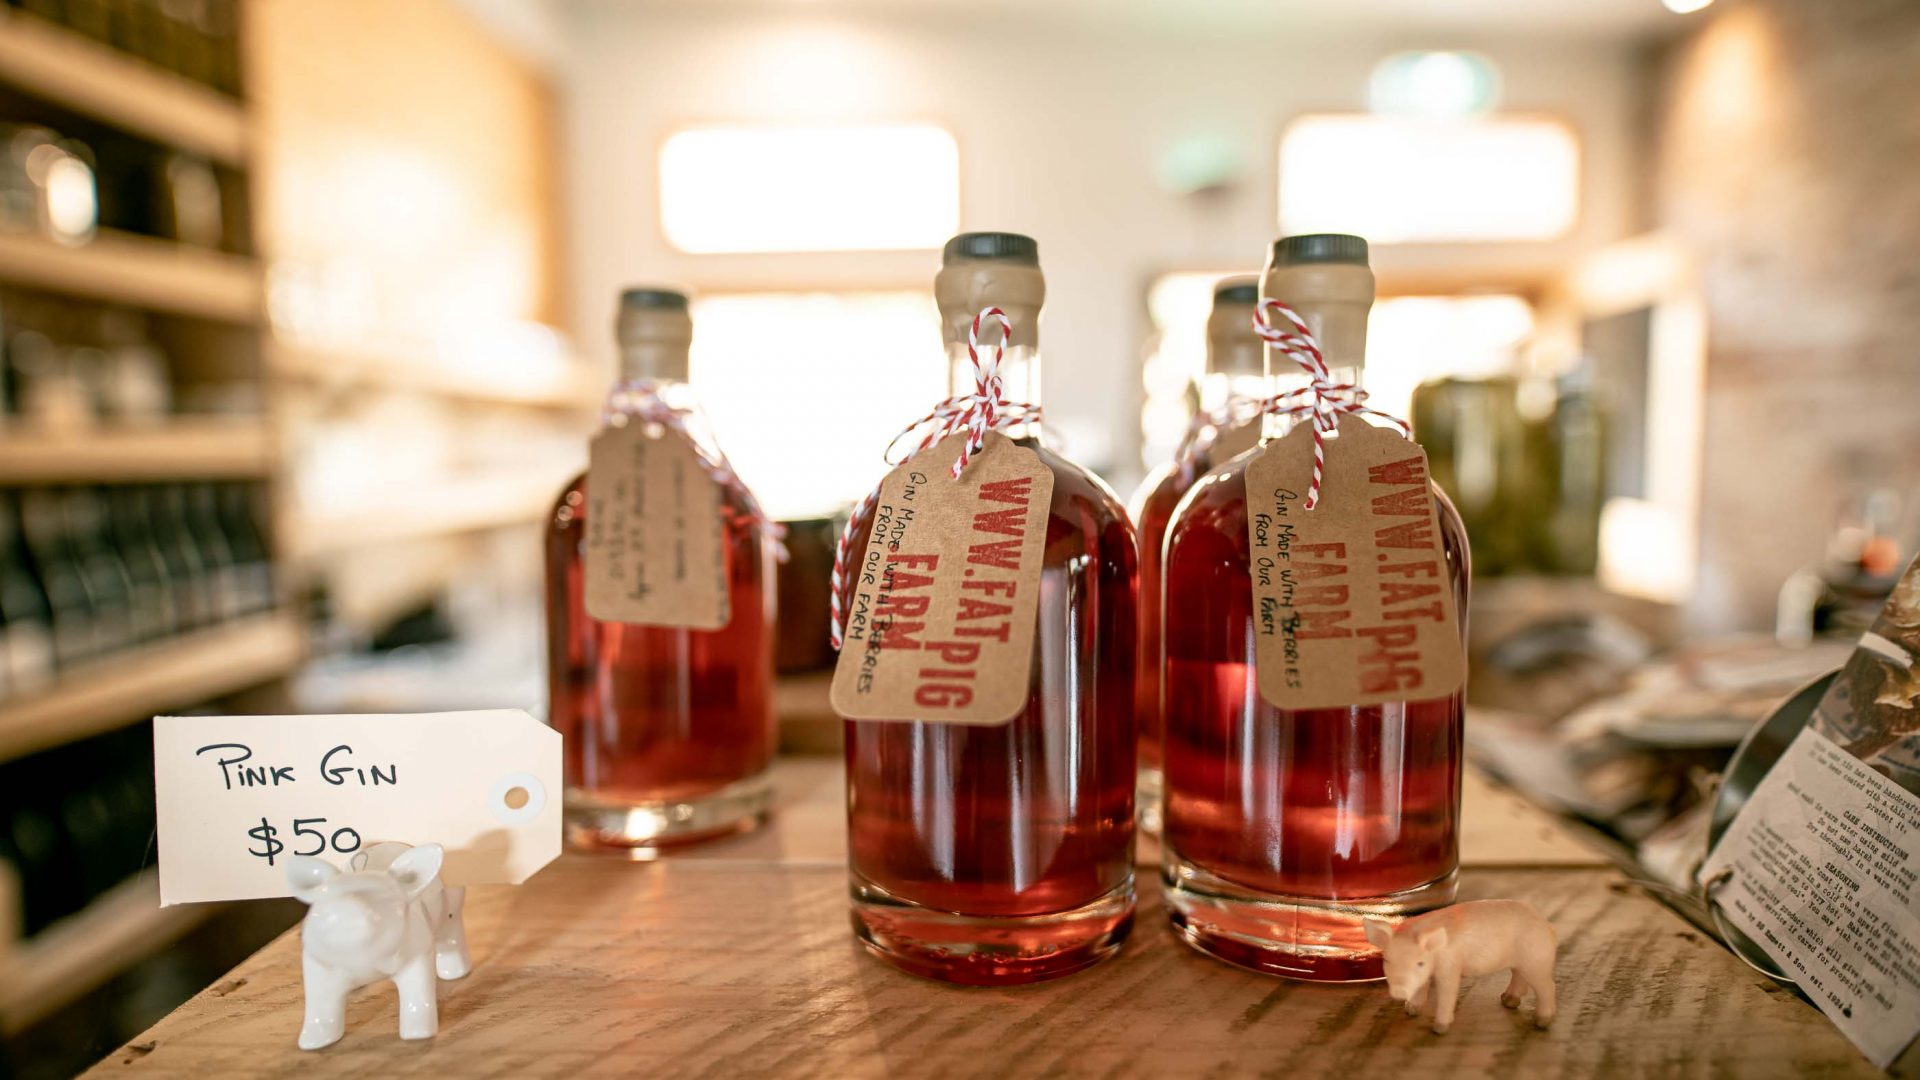 Bottles of pink coloured gin for sale.